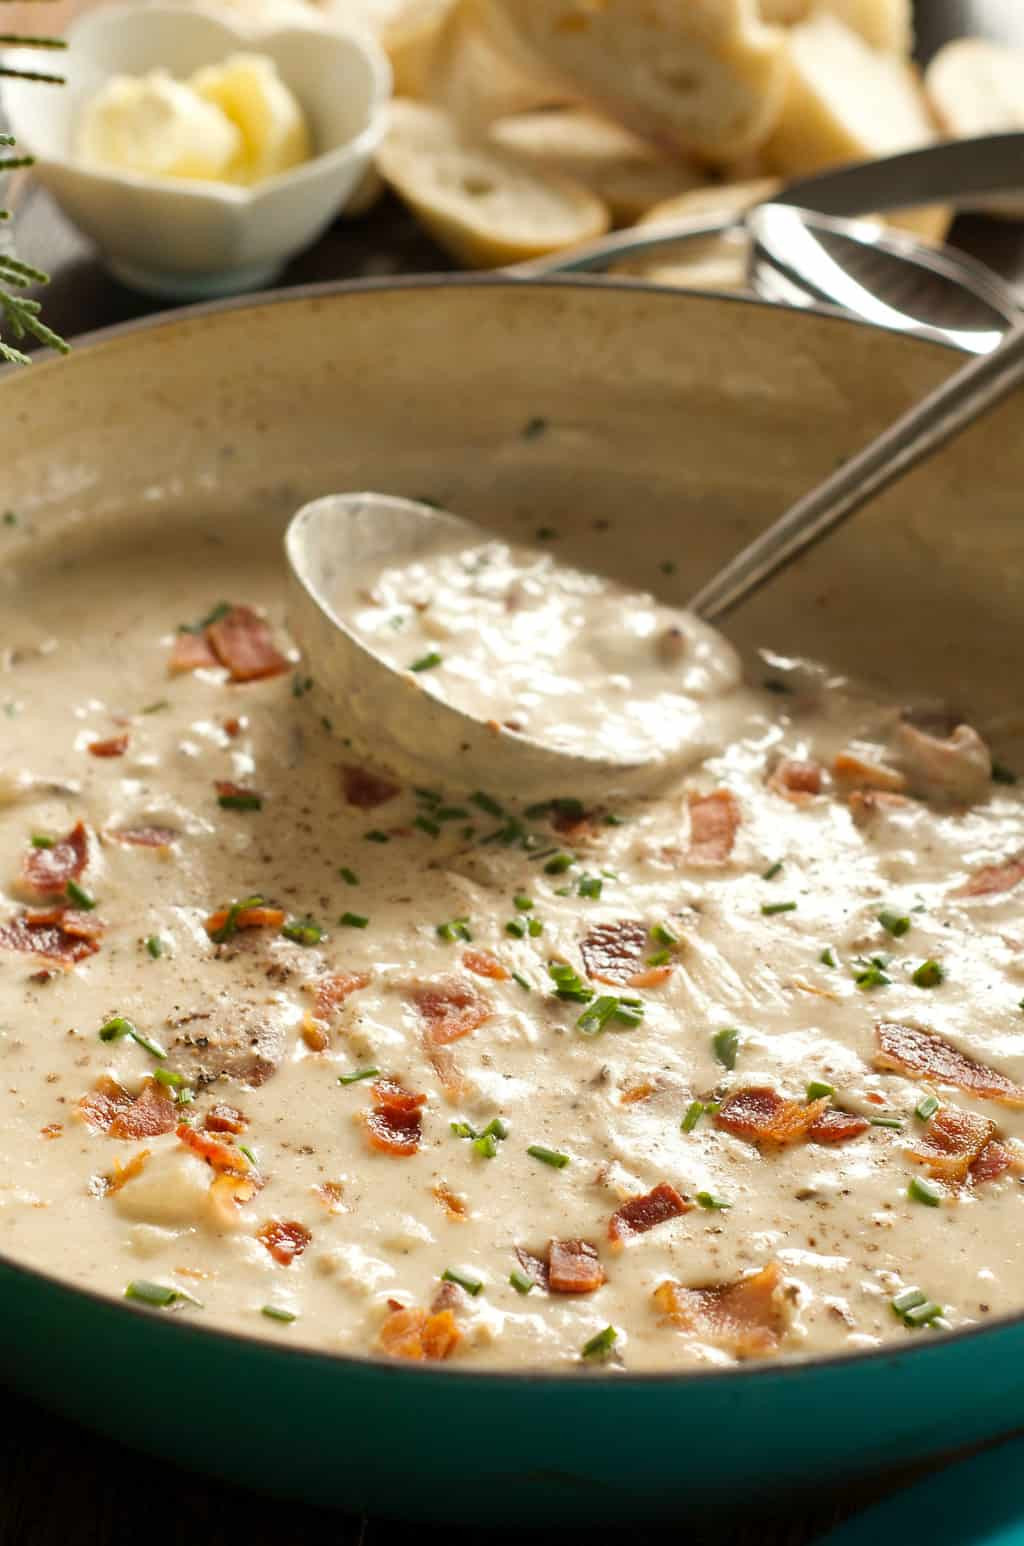 Best Seafood Chowder Recipe
 The Very Best Clam Chowder Recipe Reluctant Entertainer